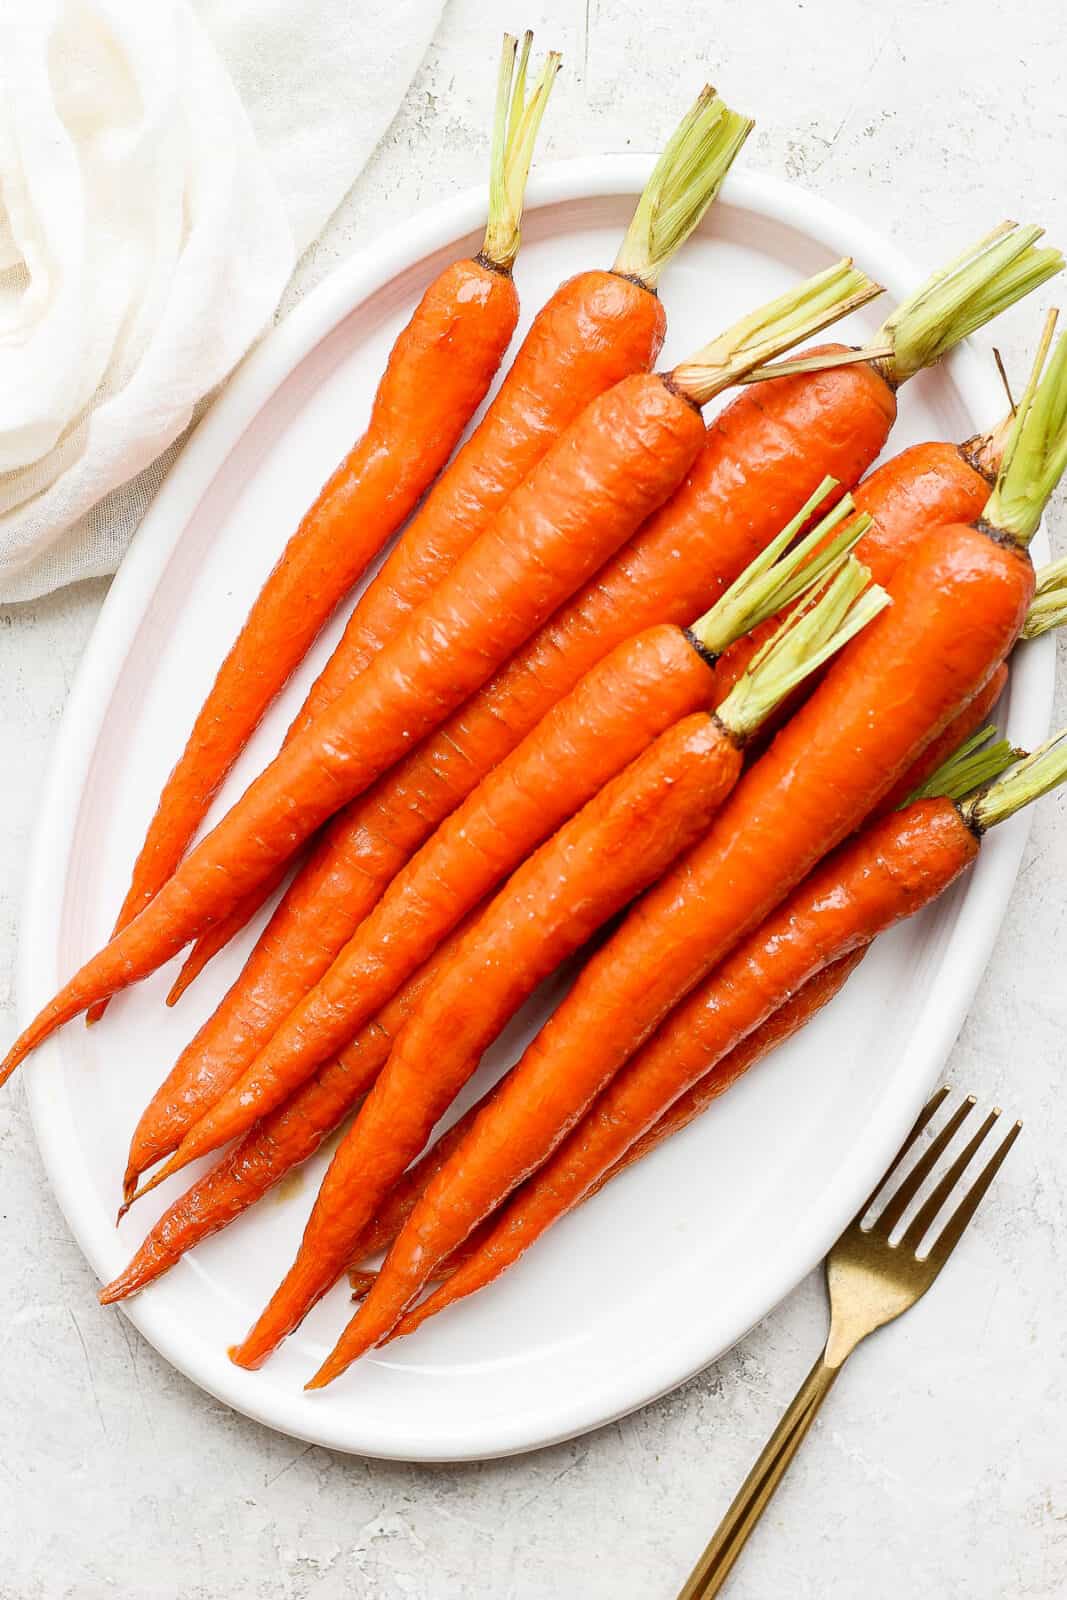 Whole roasted carrots on a small platter.